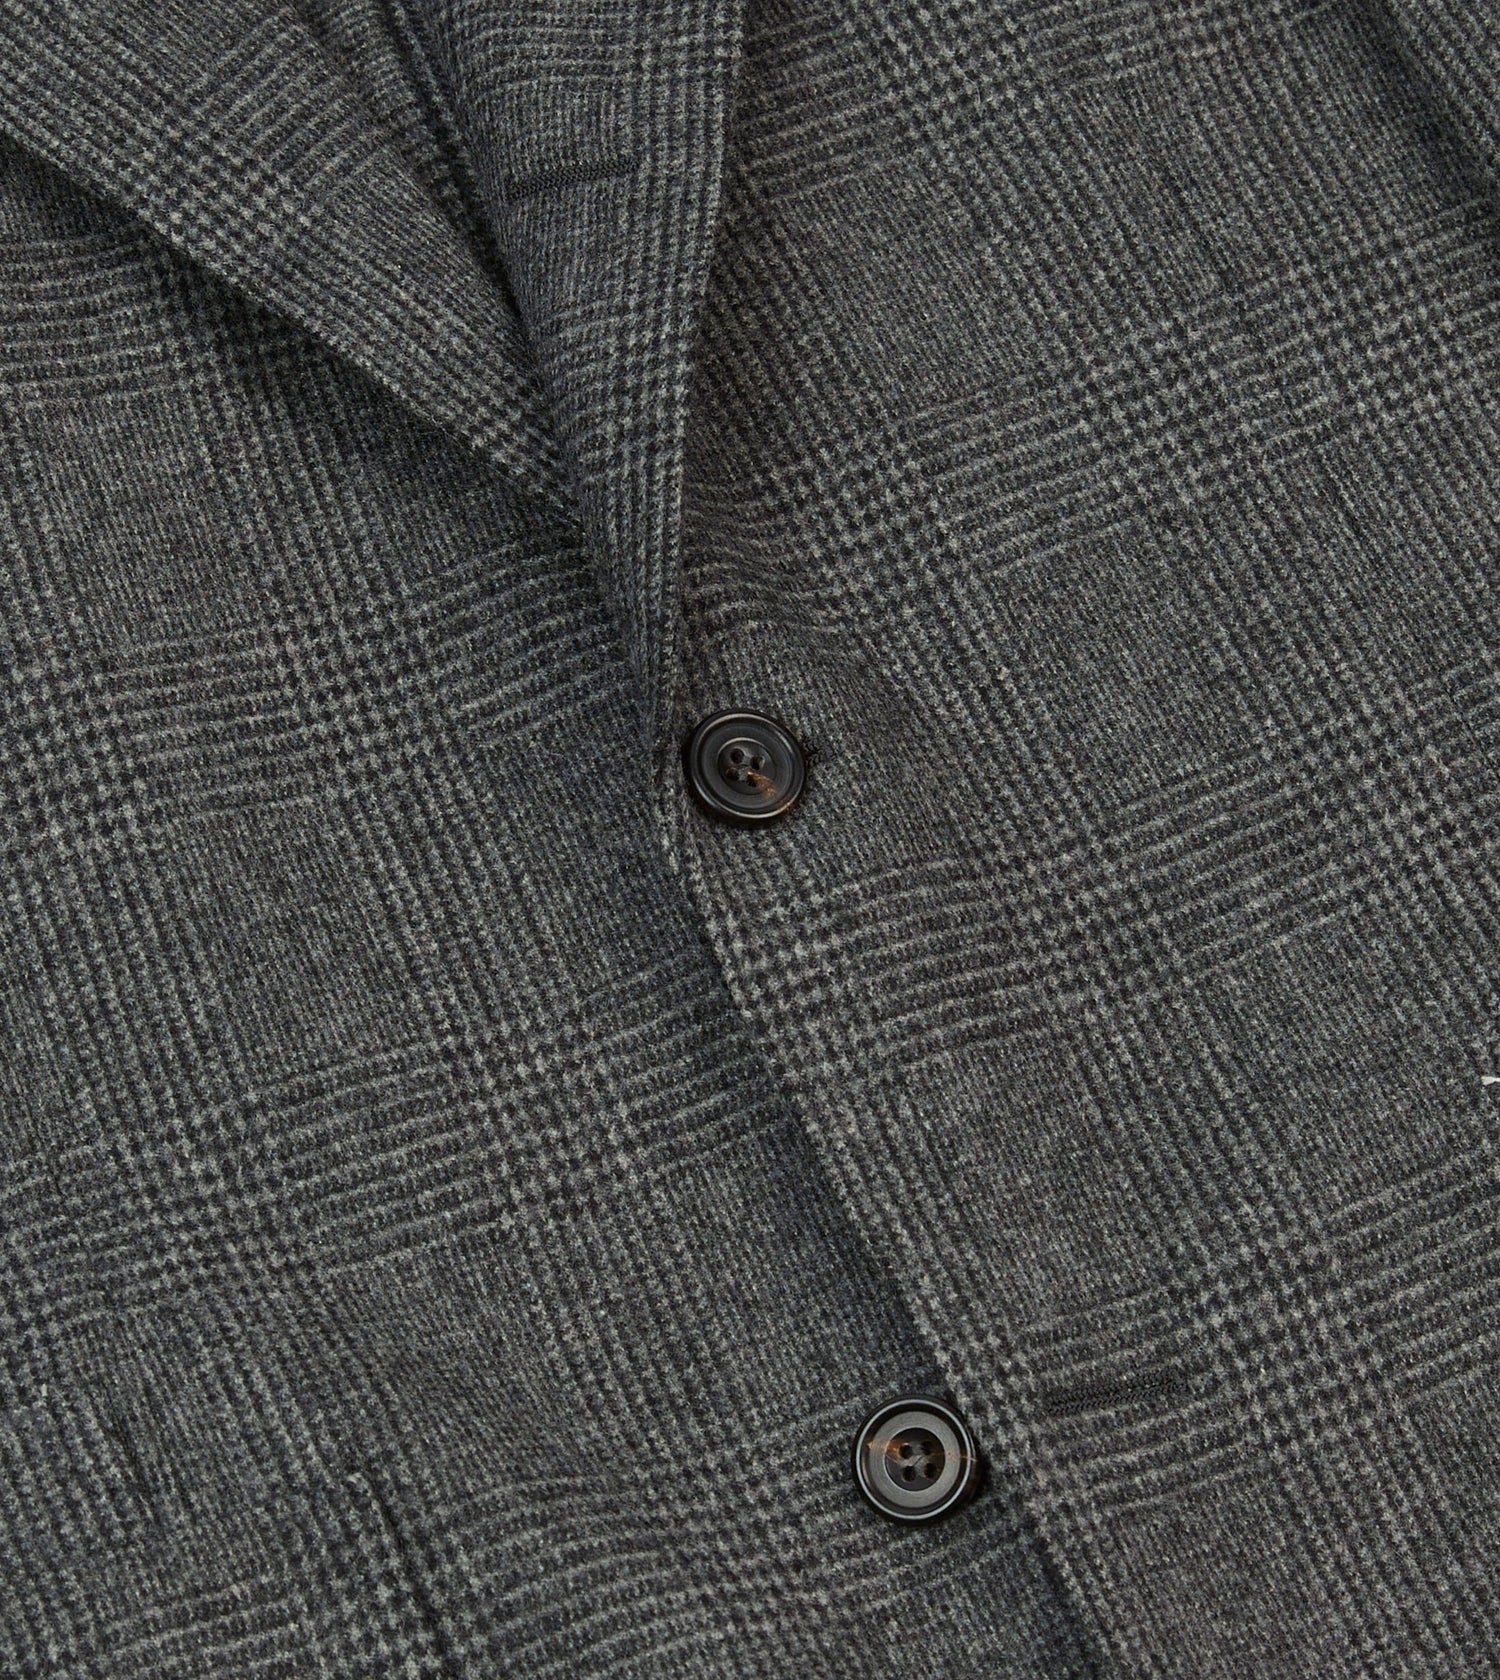 Grey Prince of Wales Check Wool Flannel Tailored Jacket